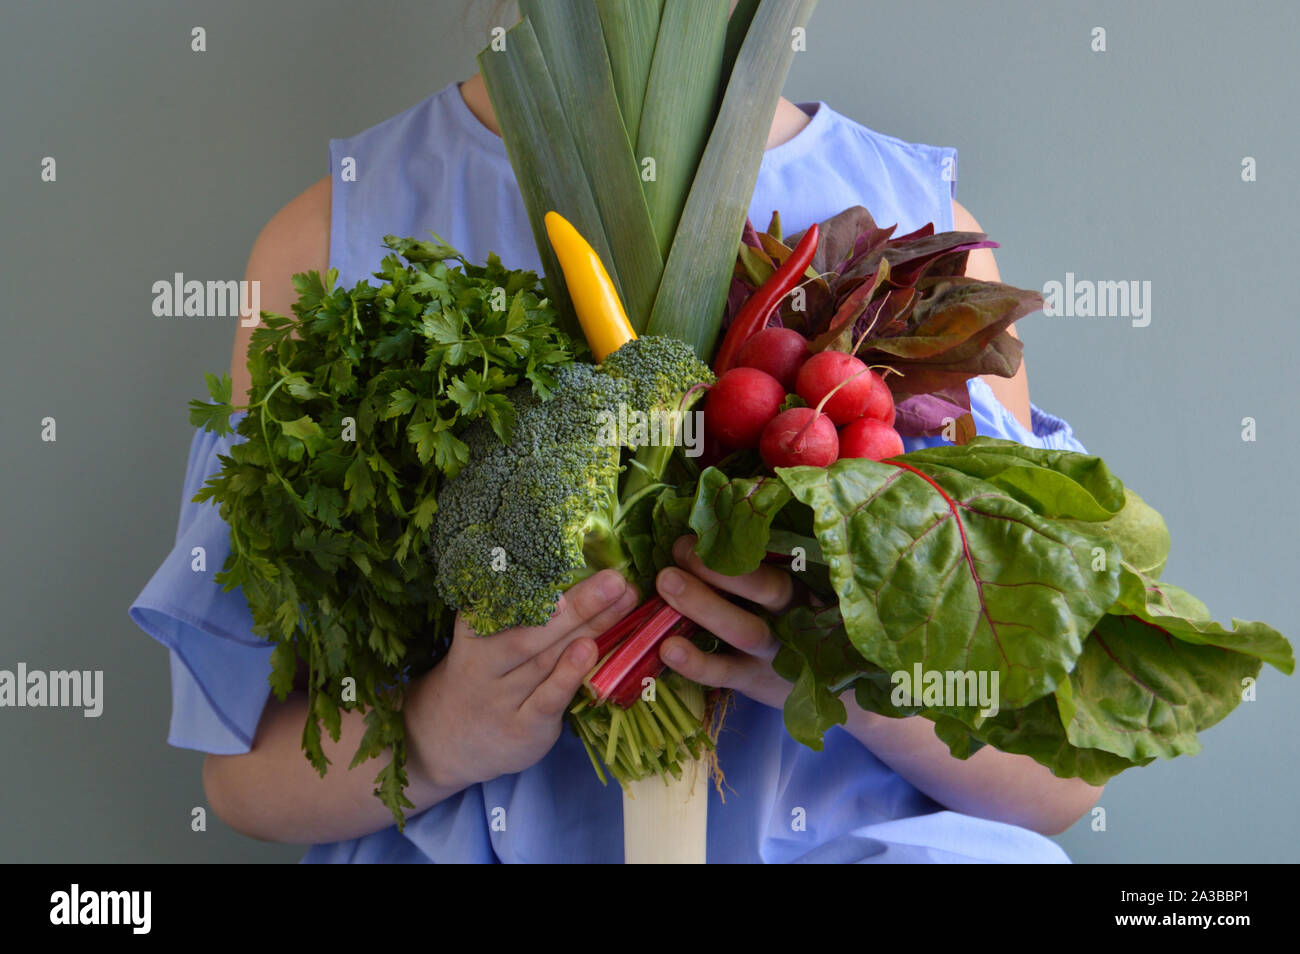 Girl holding vegetables bouquet Stock Photo